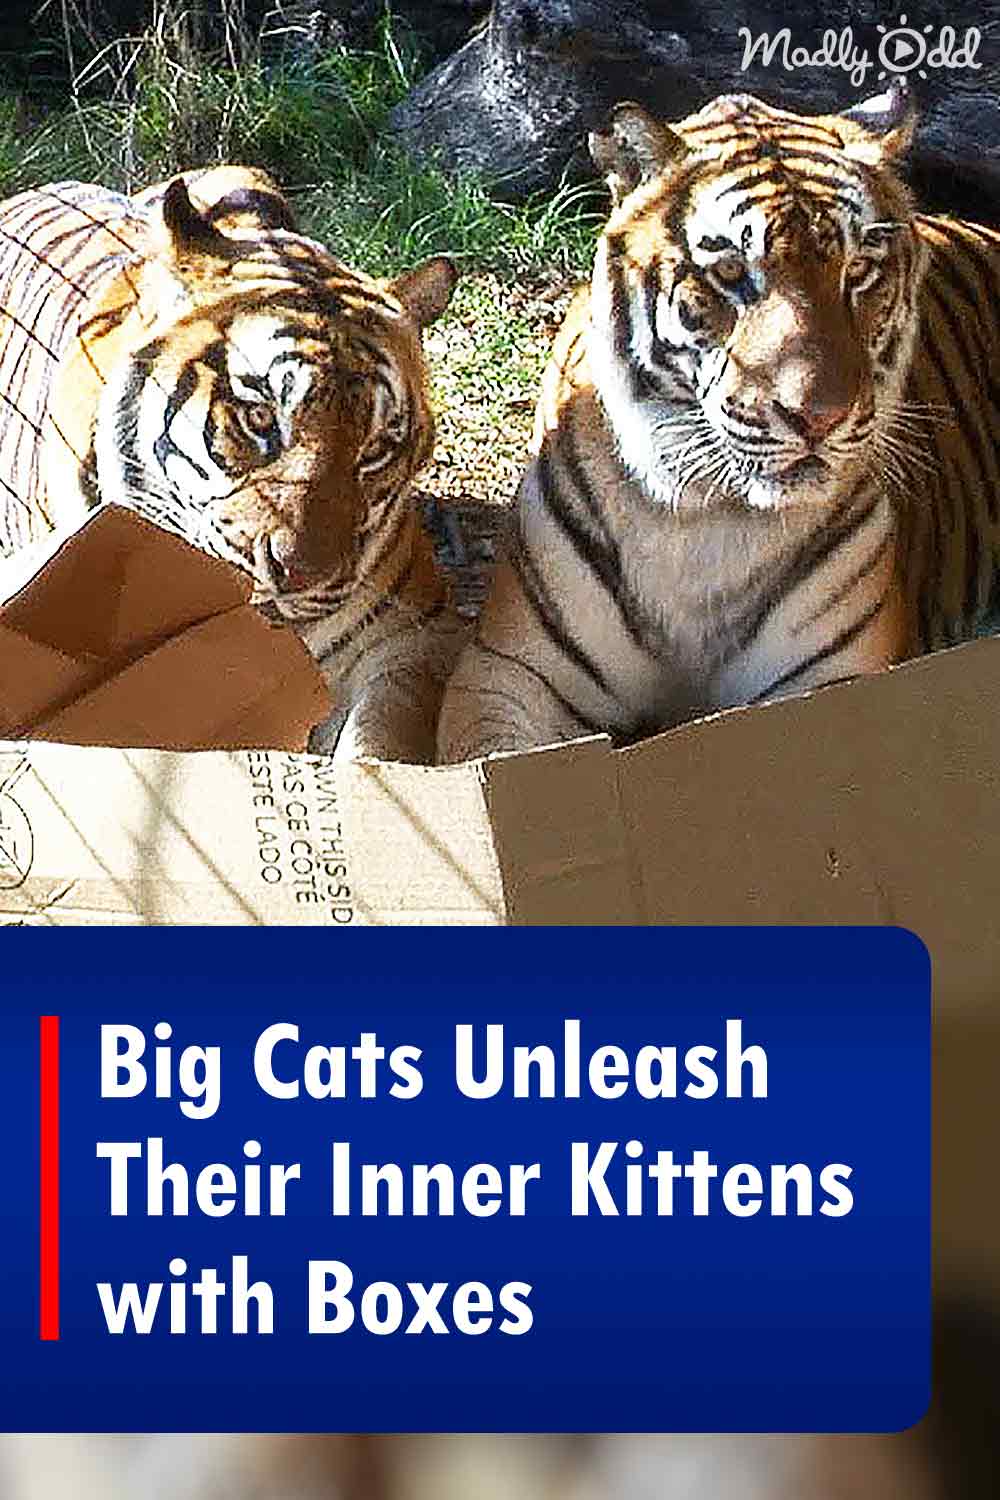 Big Cats Unleash Their Inner Kittens with Boxes